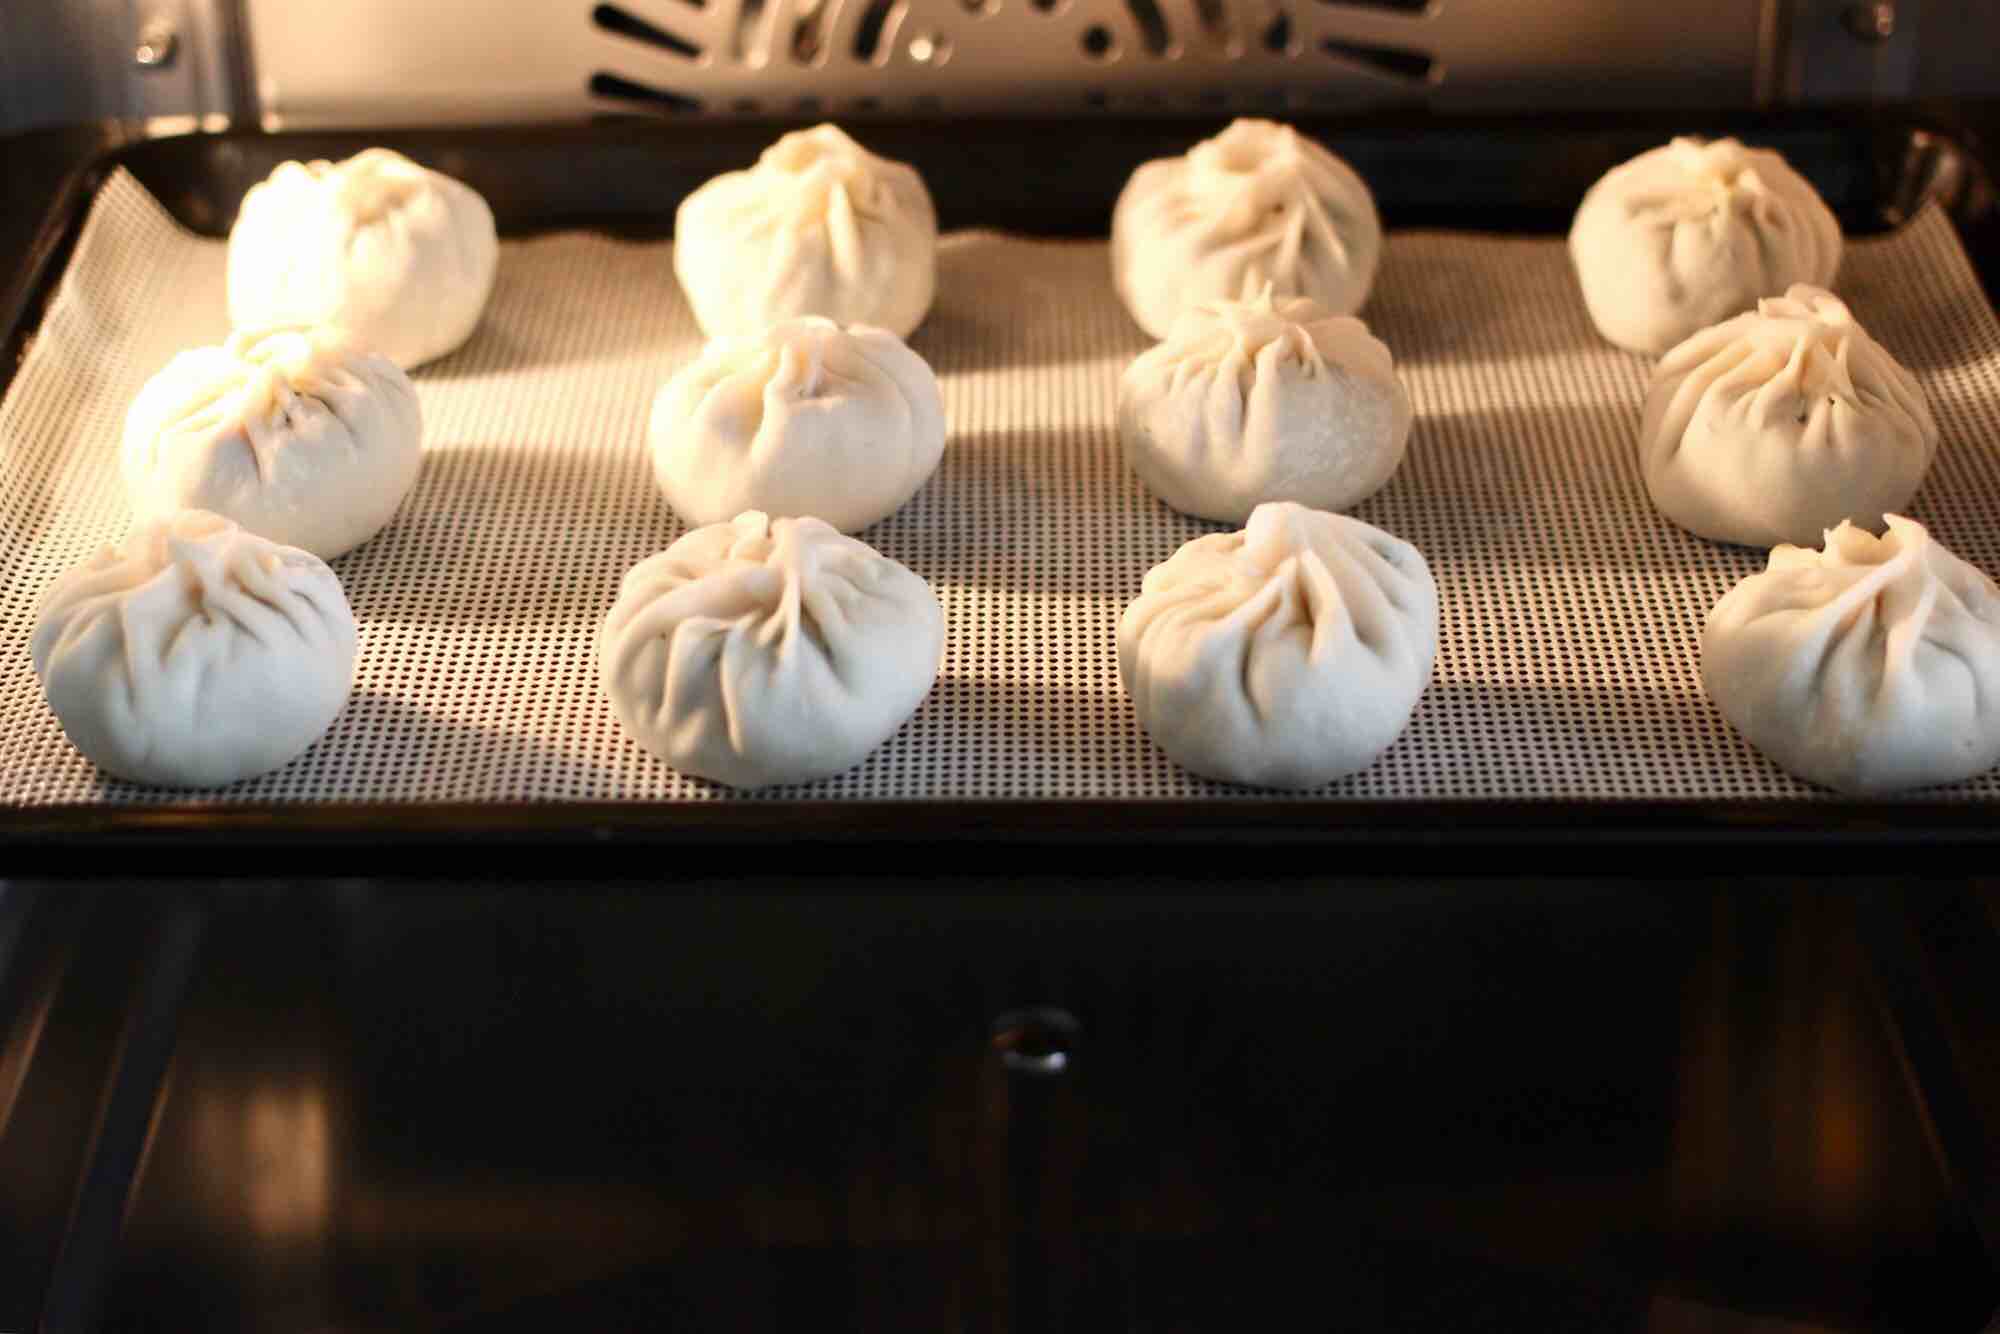 Steamed Buns with Pork and Haw Sauce recipe